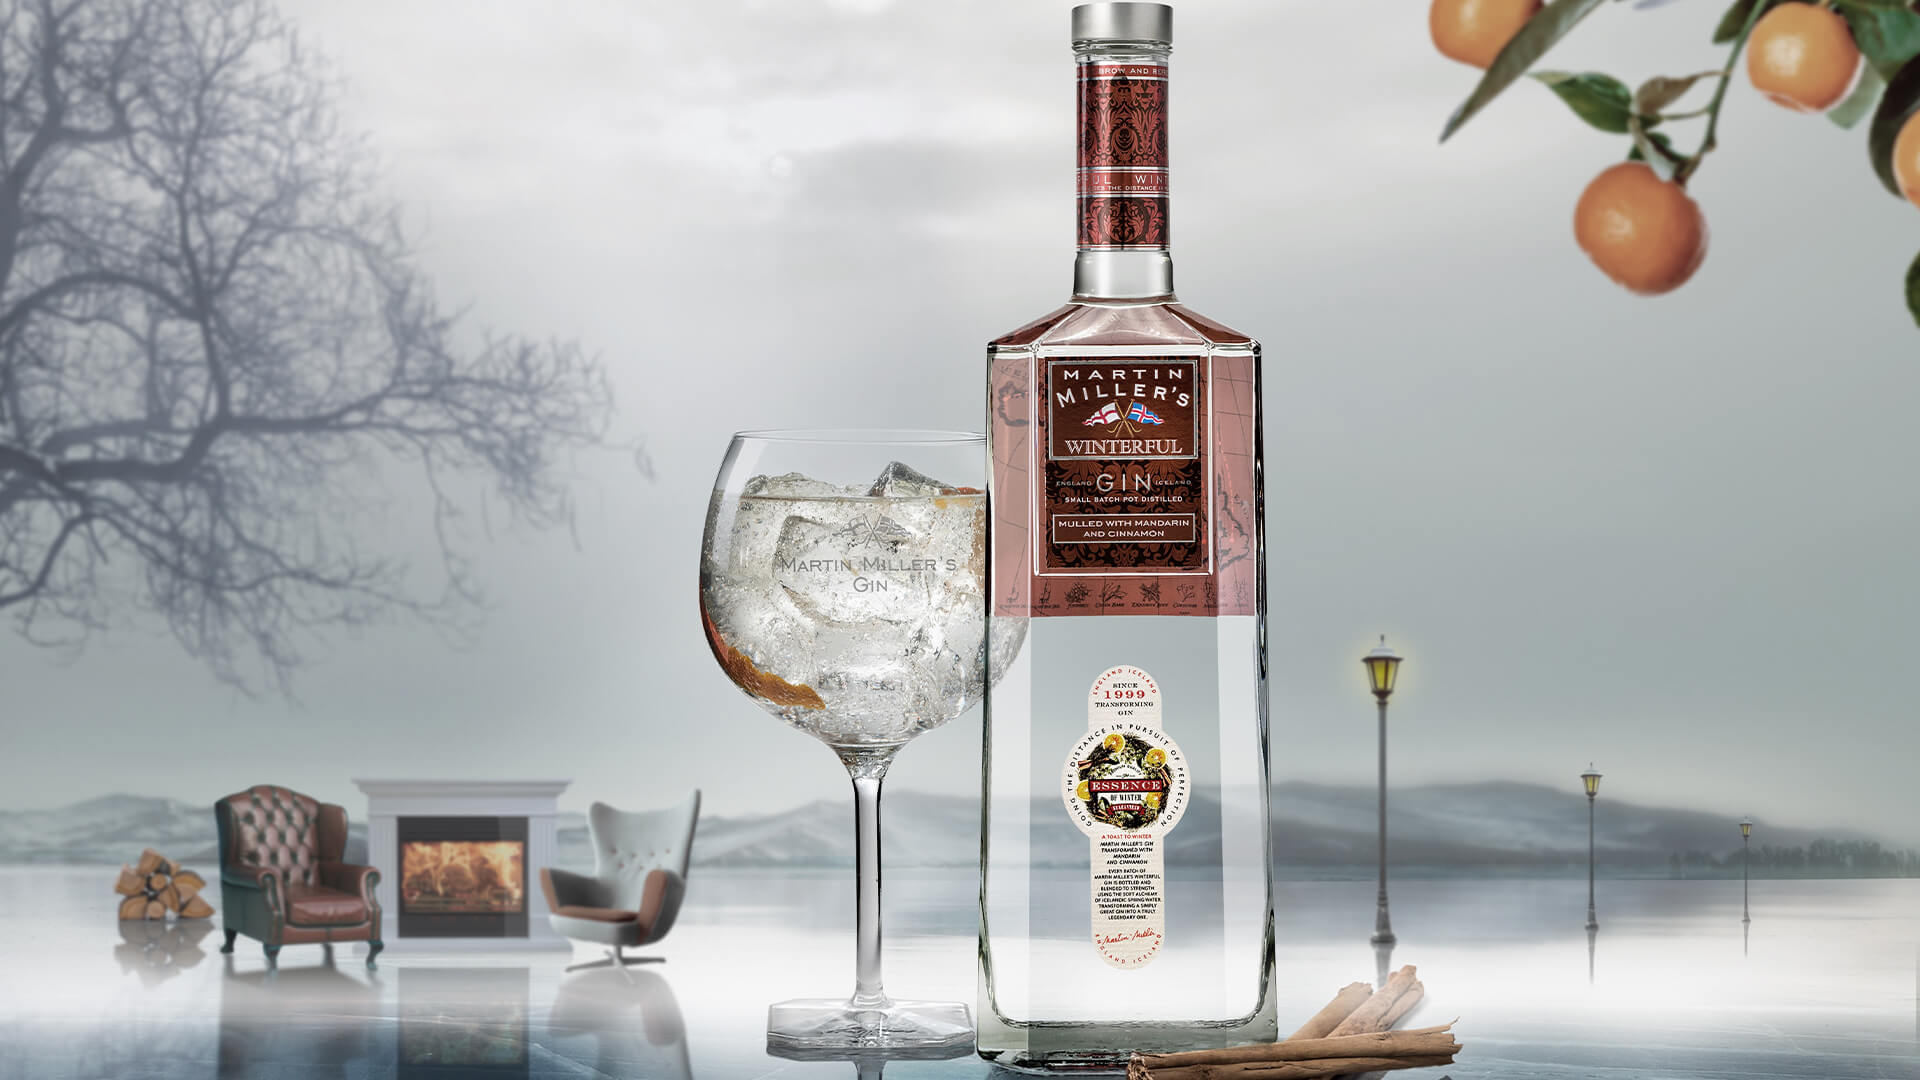 A bottle of Martin Miller's Winterful Gin with a gin bubble glass next to it. There is oranges growing from branches in the top right corner, a brown leather chair in the middle left side, and an aura of mystery in the foggy background